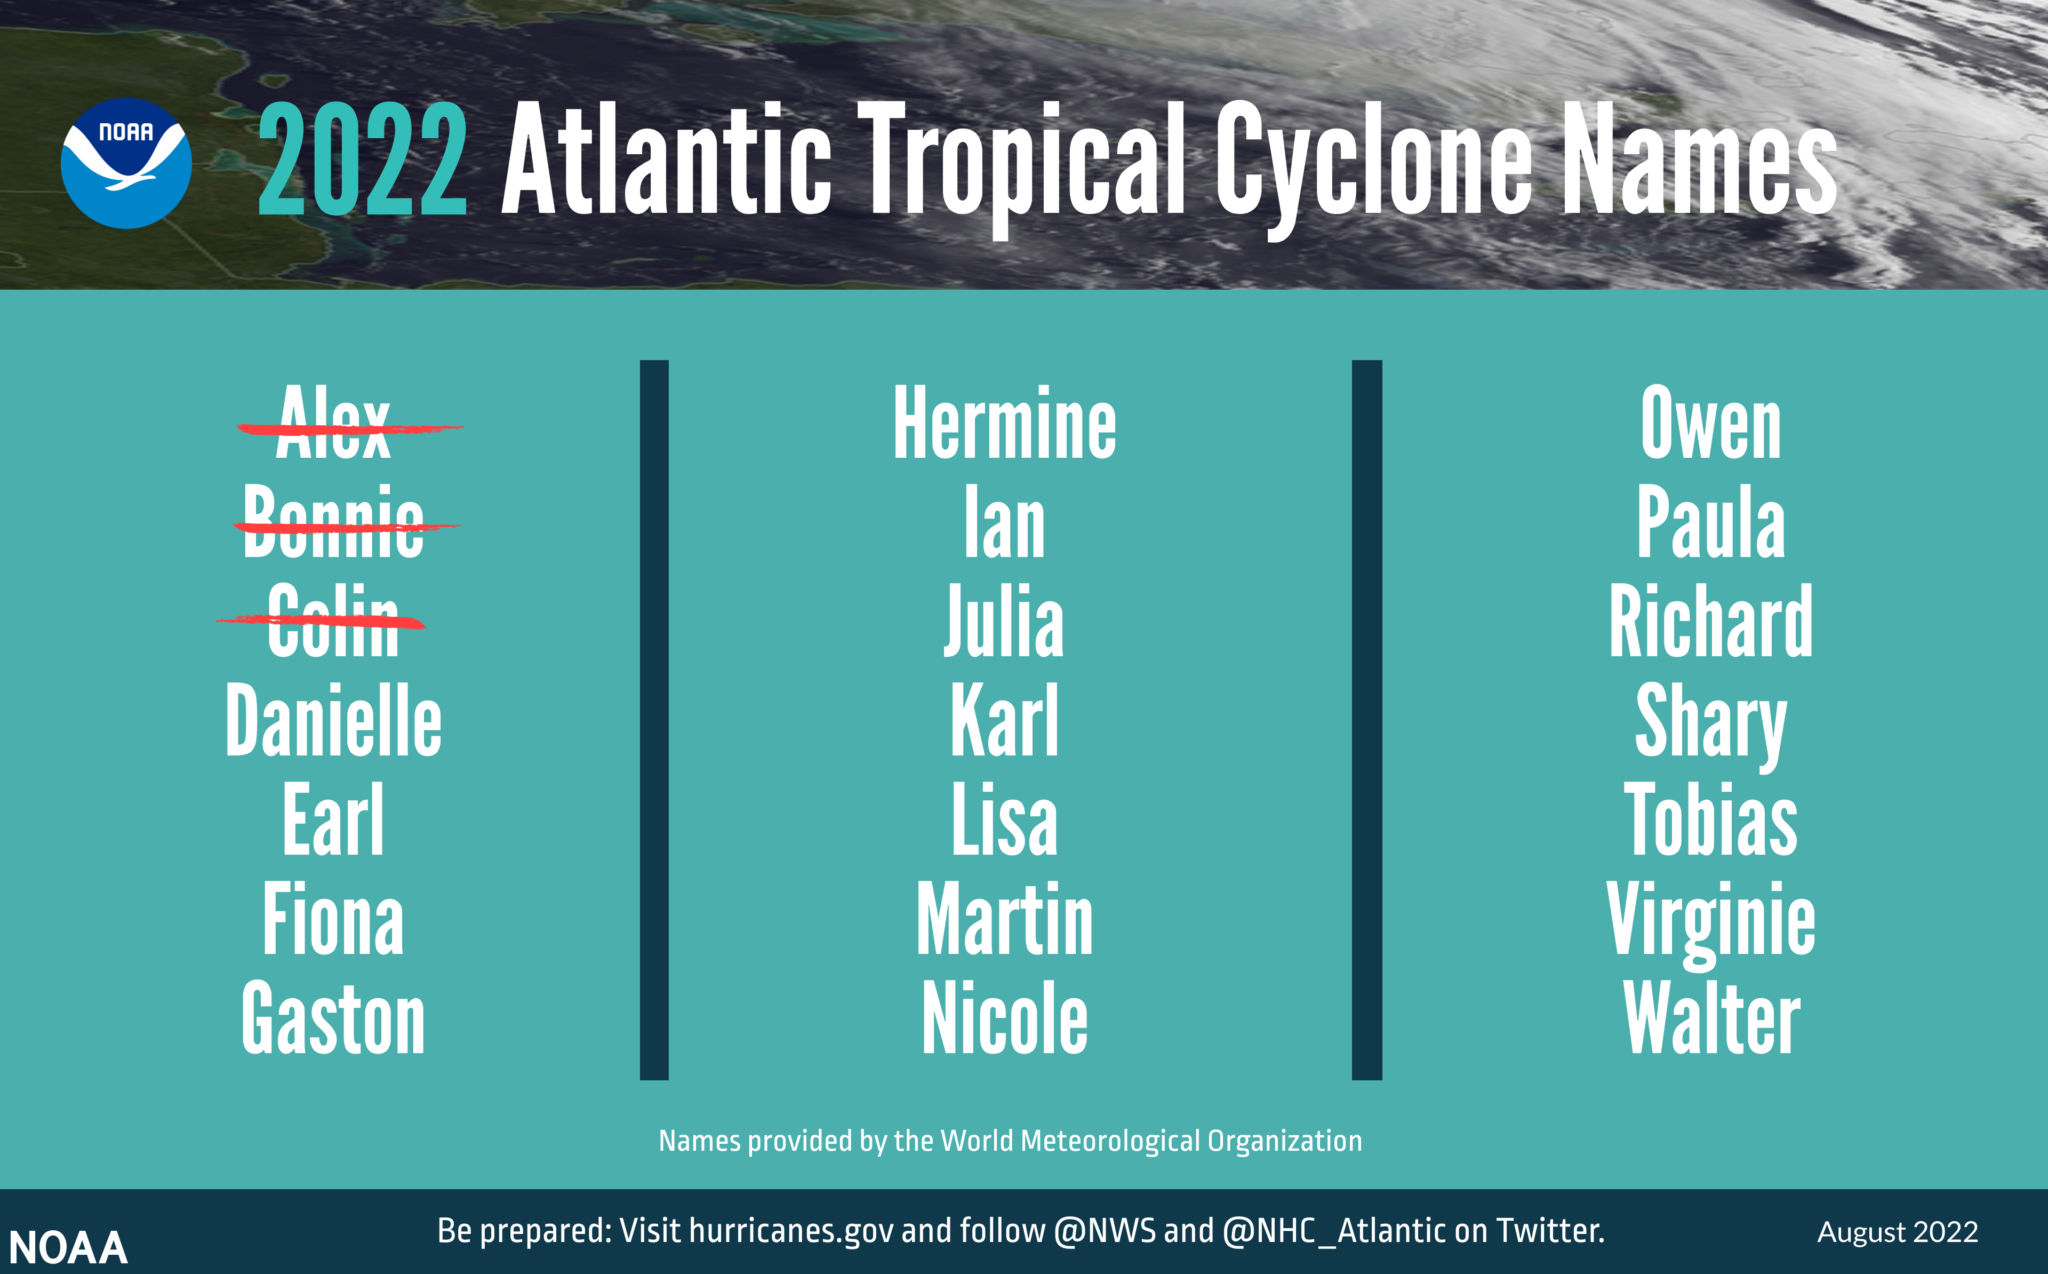  The 2022 Atlantic tropical cyclone names selected by the World Meteorological Organization. (Image courtesy of NOAA)